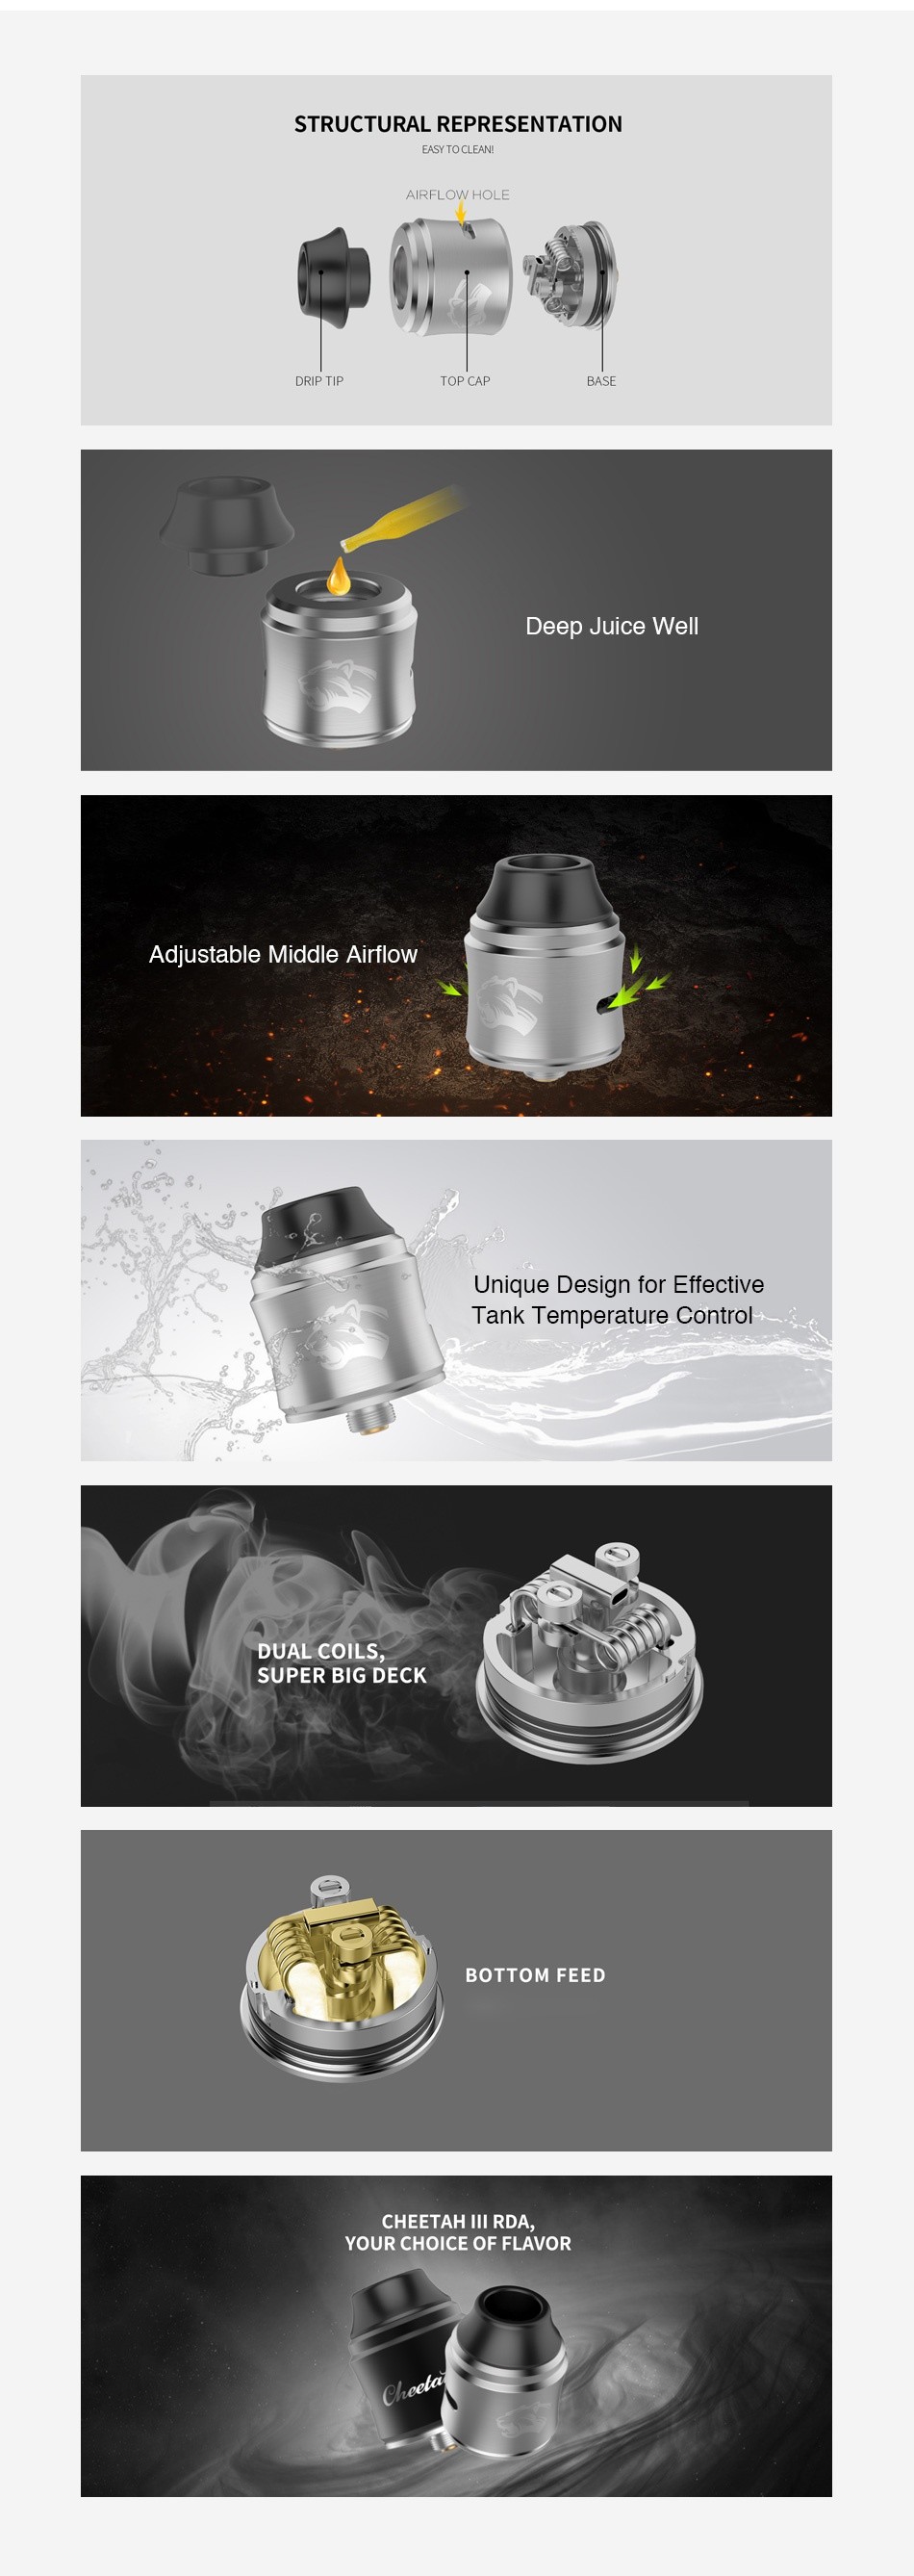 OBS Cheetah 3 RDA STRUCTURAL REPRESENTATION EASY TO CLE AIR LOW HOLE    DRIPT PASF Deep Juice Wel Adjustable Middle Airflow Unique Design for Effective Tank Temperature Control DUAL COILS SUPER BIG DECK BOTTOM FEED CHEETAH III RDA YOUR CHOICE OF FLAVOR